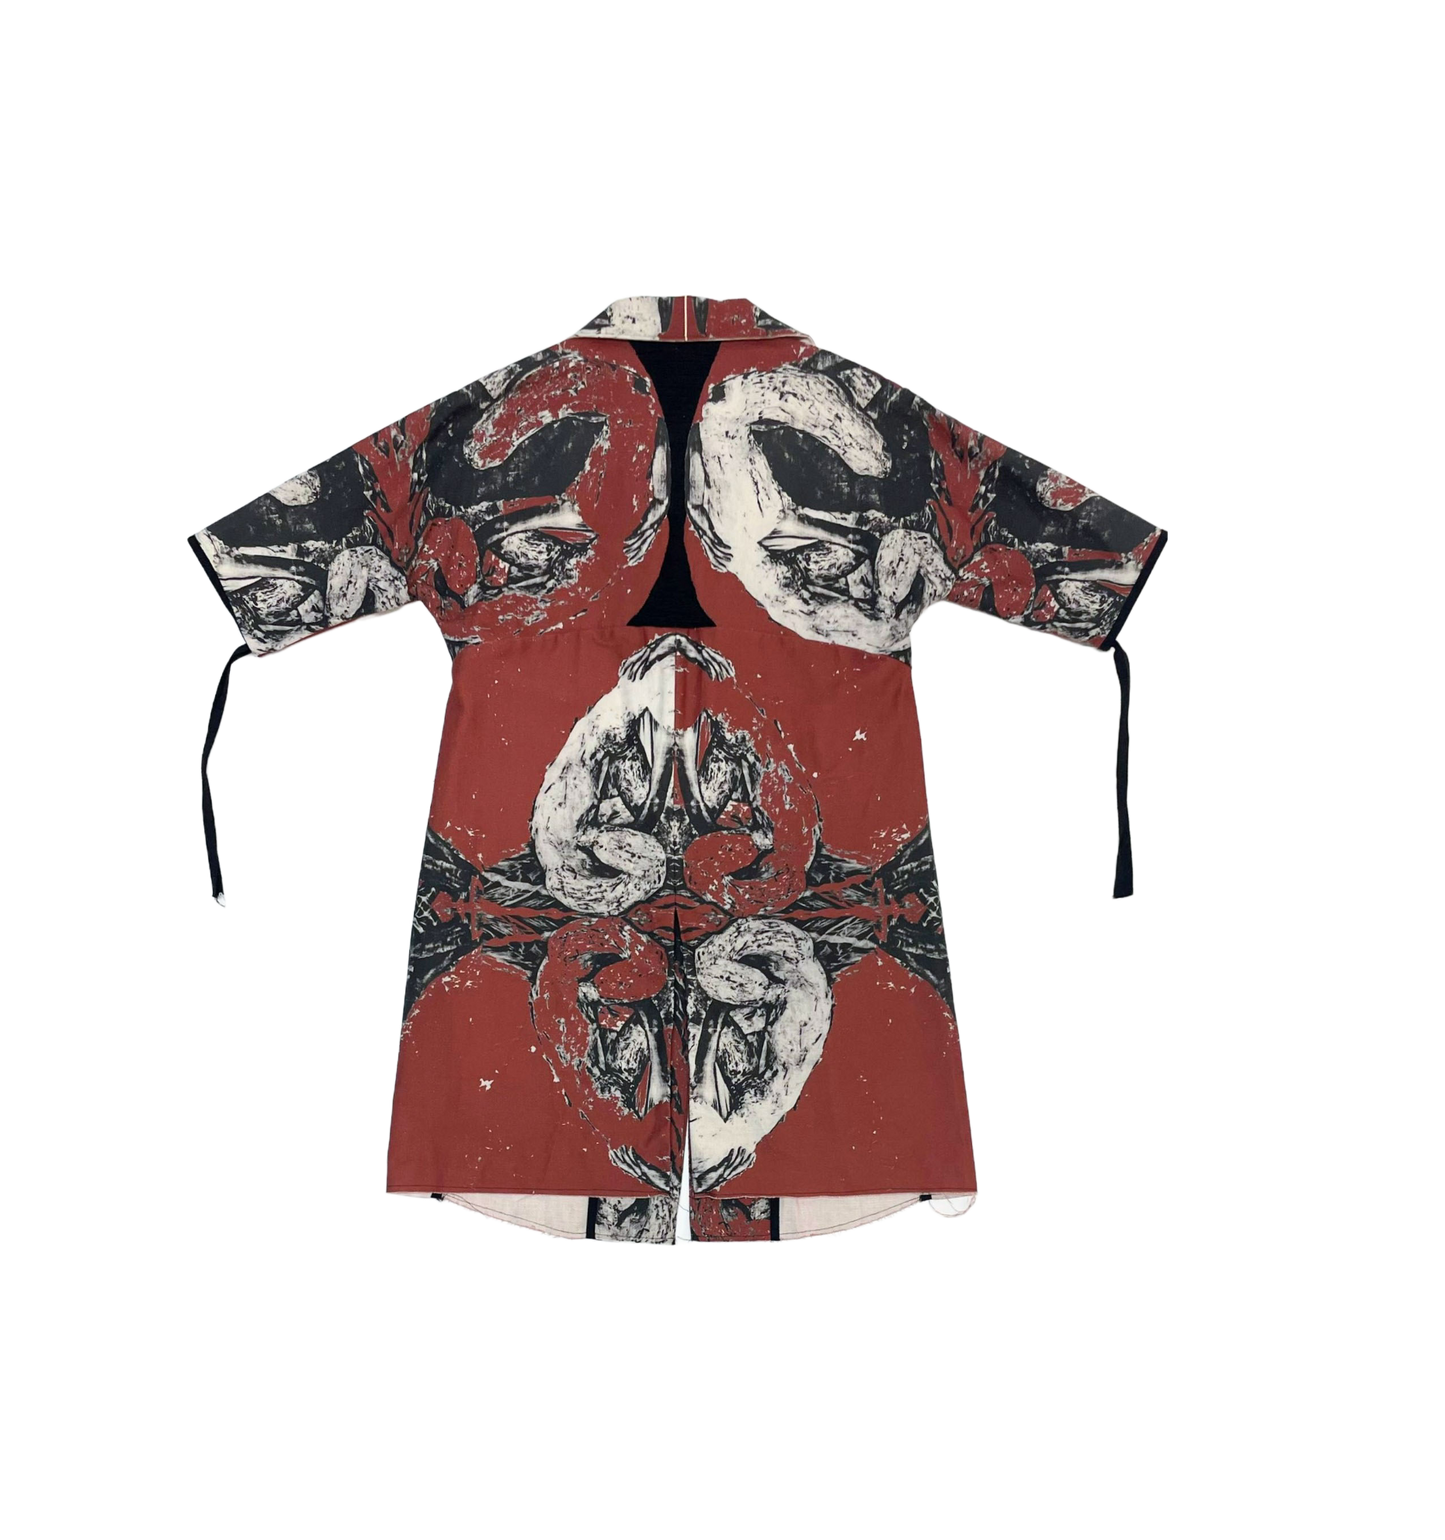 Curve Seam Short Sleeve  Mac Red Black & White “Holubiyi” Cotton Digital Print by Holly Vaughan’s photolitho series ‘Siren’ with Hand Embroidered Details & Cotton Twill Ties